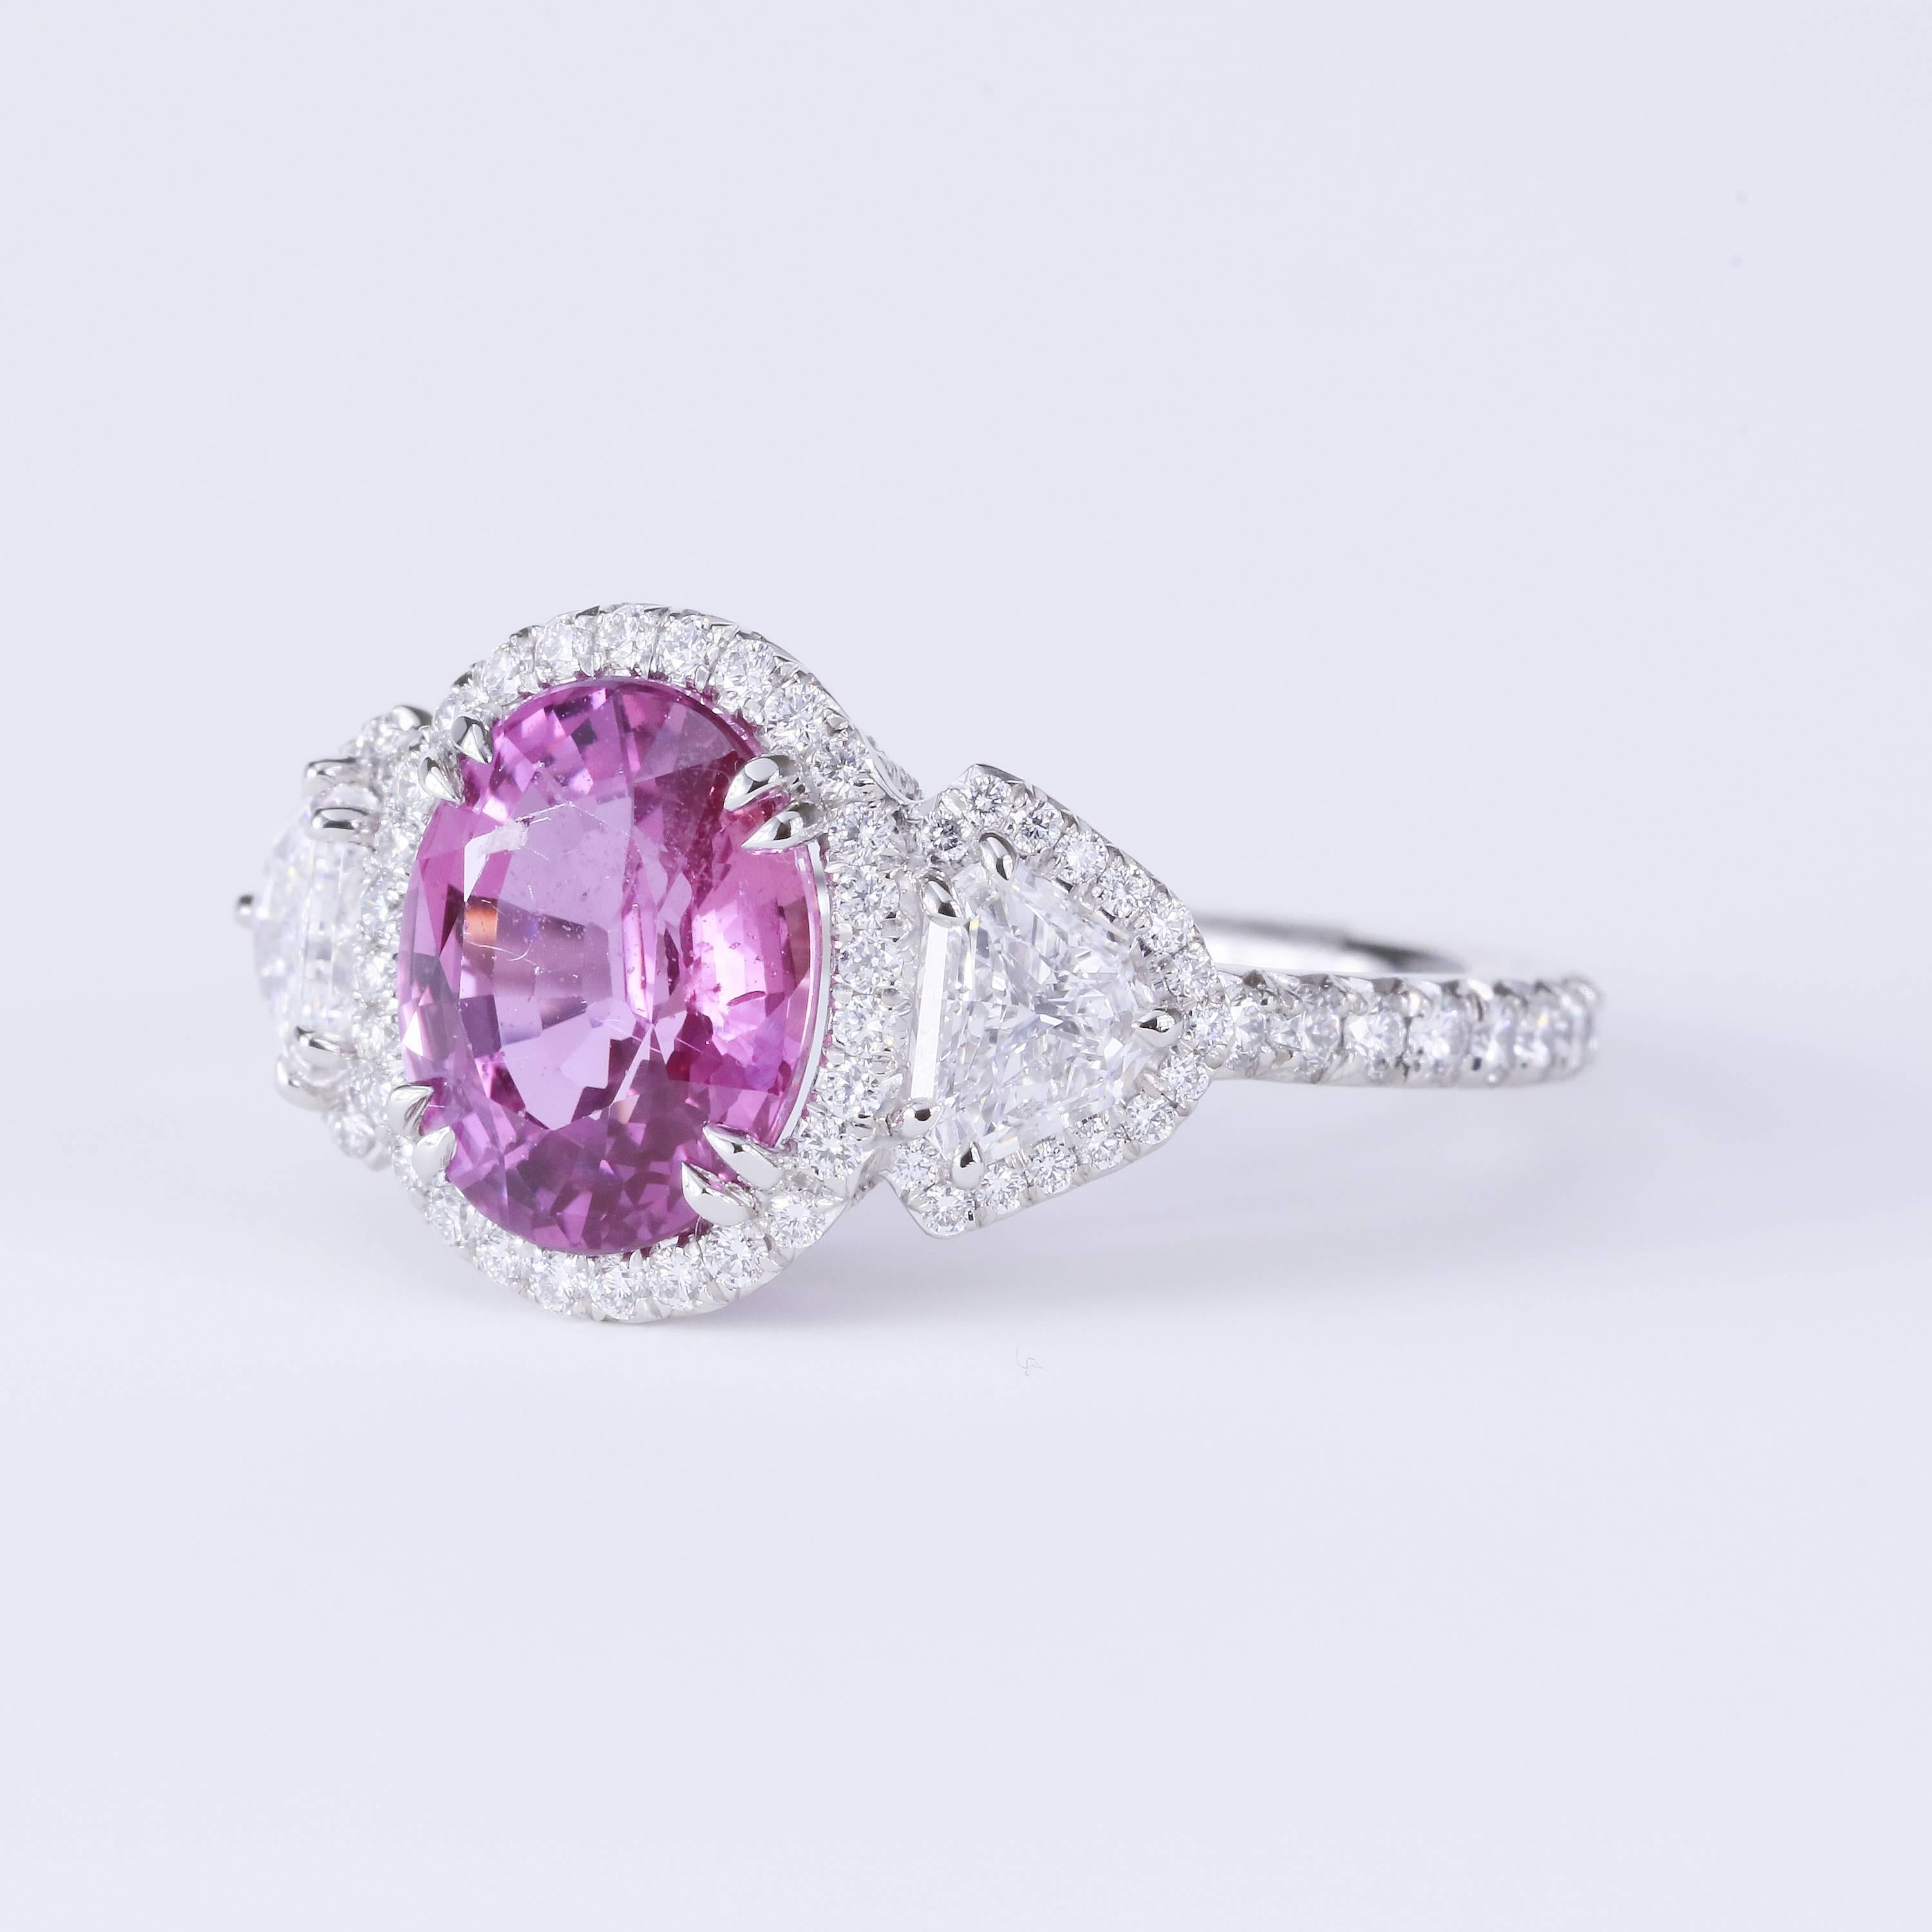 3.23 ct purple-pink natural sapphire oval center
Shield side stones D VS1 0.65 tw (2 stones)
Round diamond melee on halo, gallery and shank 0.61 tw (134 stones)
Platinum 3 stone ring
Size 6.25